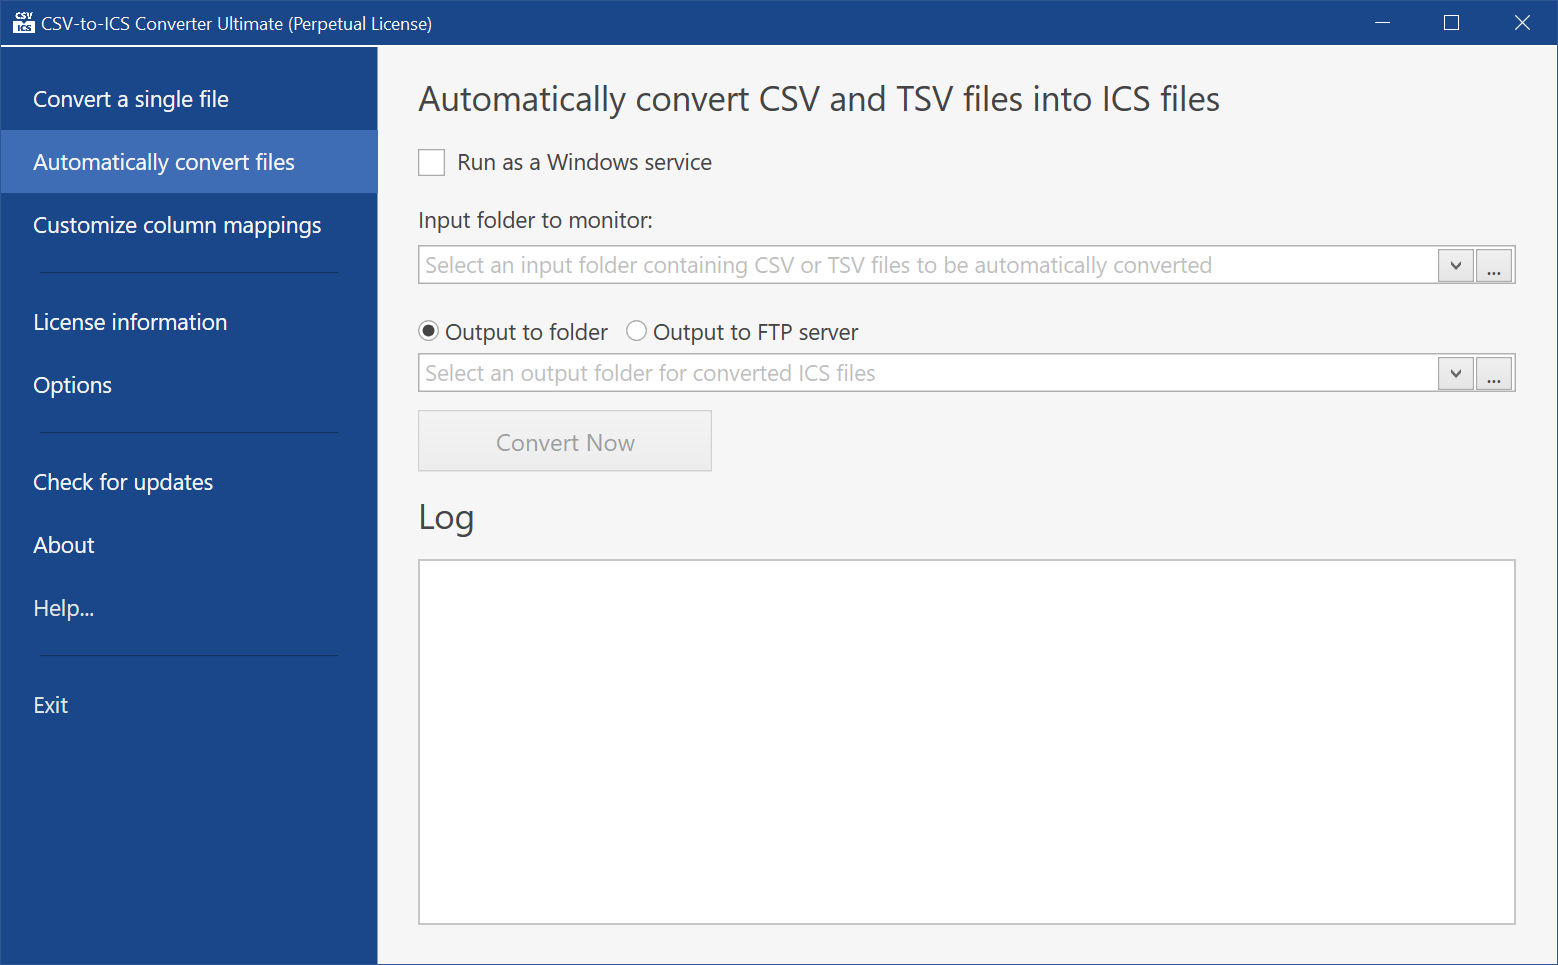 The 'Automatically convert files' tab is where an input folder containing CSV files can be specified. The files will be automatically converted into ICS files and stored in the specified folder or uploaded to your website.